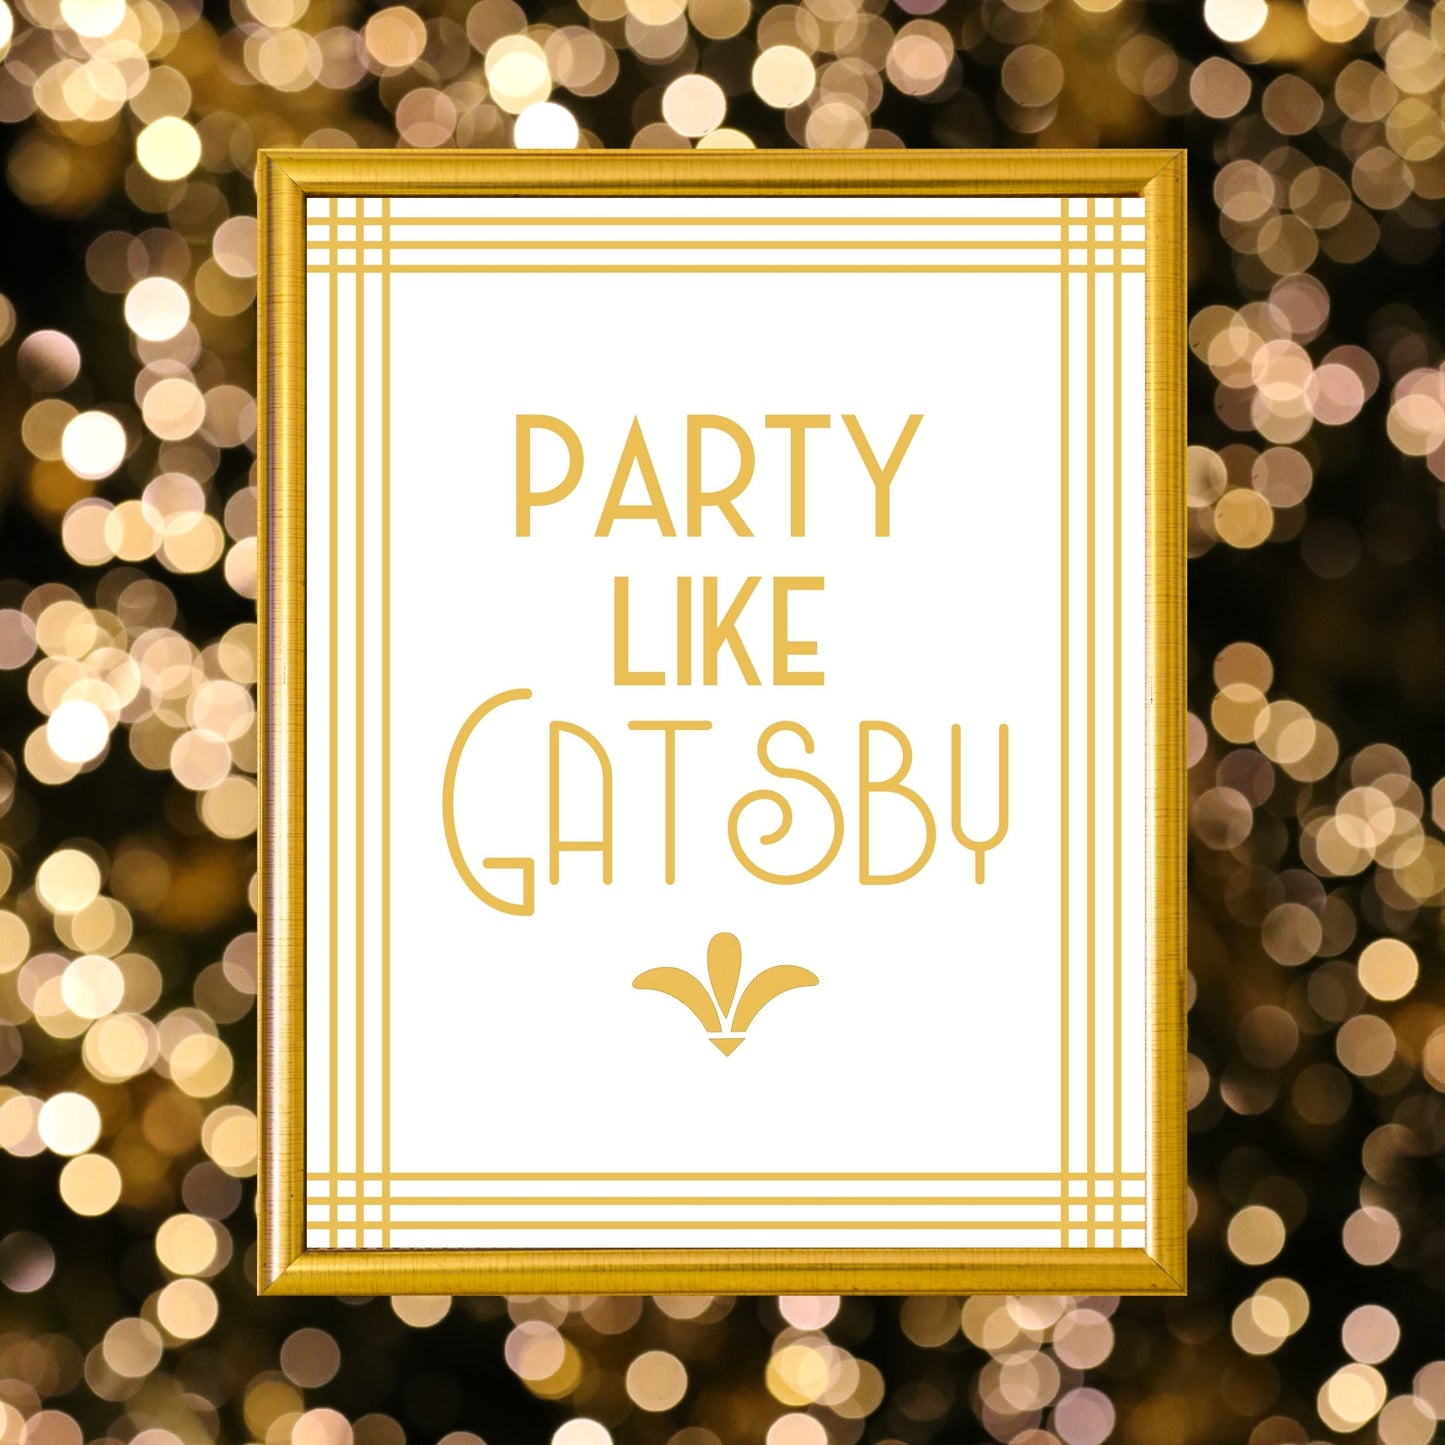 "Party Like Gatsby" Printable Party Sign For Great Gatsby or Roaring 20's Party Or Wedding, White & Gold, Printable Party Decor